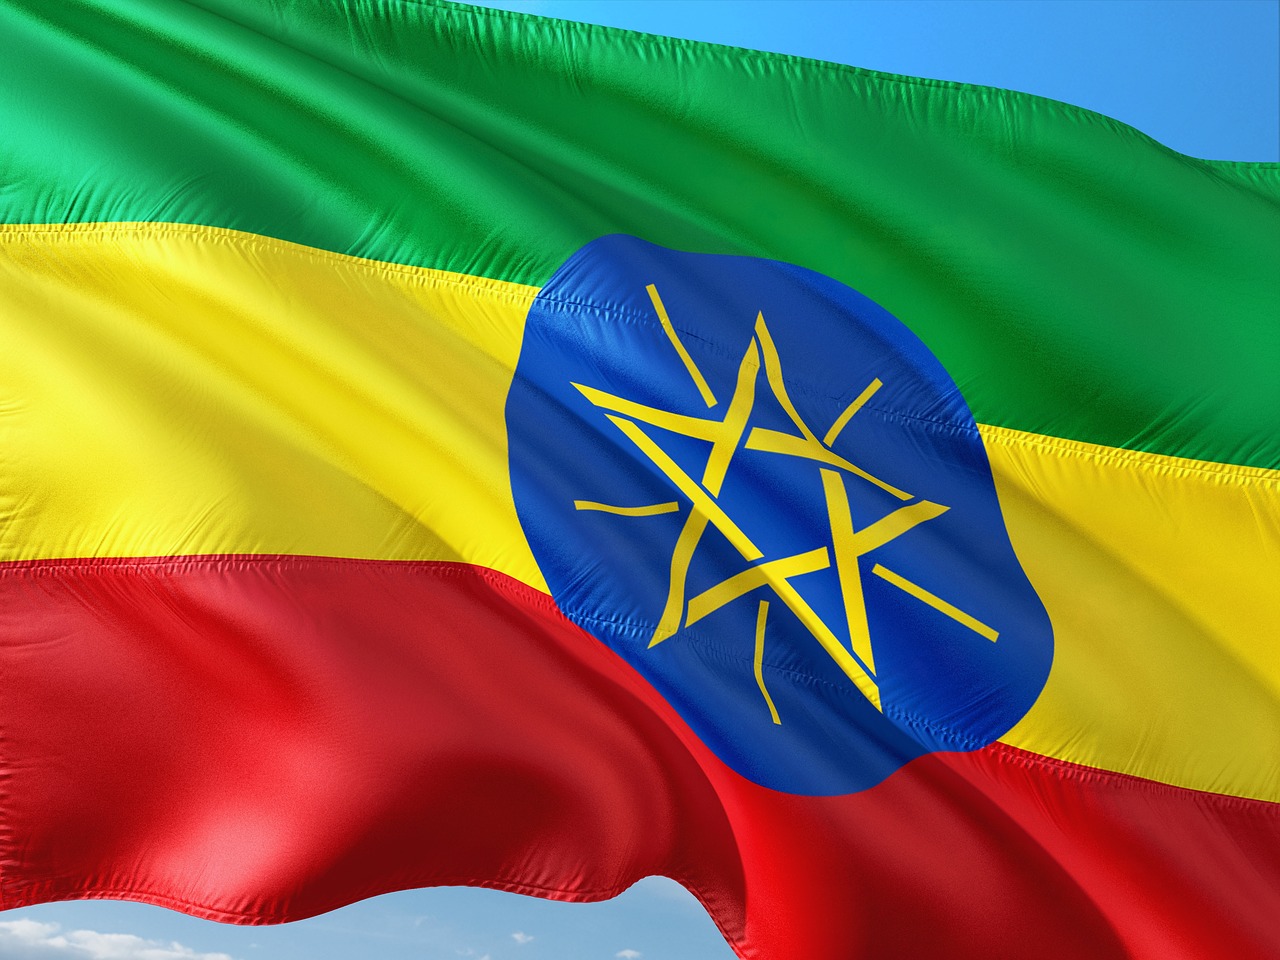 Ethiopia ambassador to Somalia issues apology following news of possible expulsion and increased tensions over Somaliland